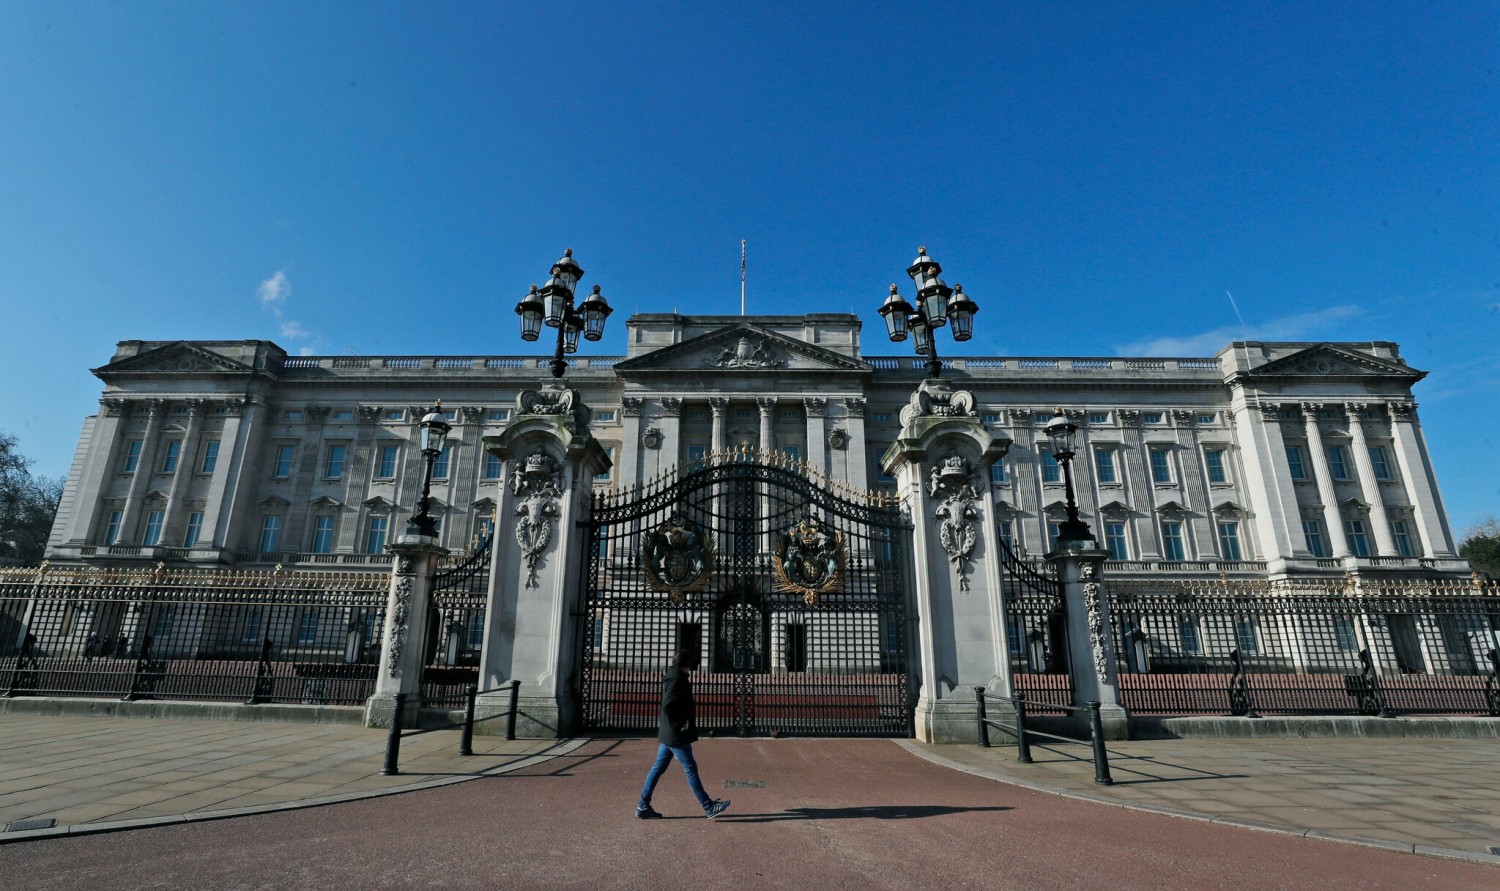 Outside Buckingham Palace in London on Tuesday.Credit...Frank Augstein/Associated Press